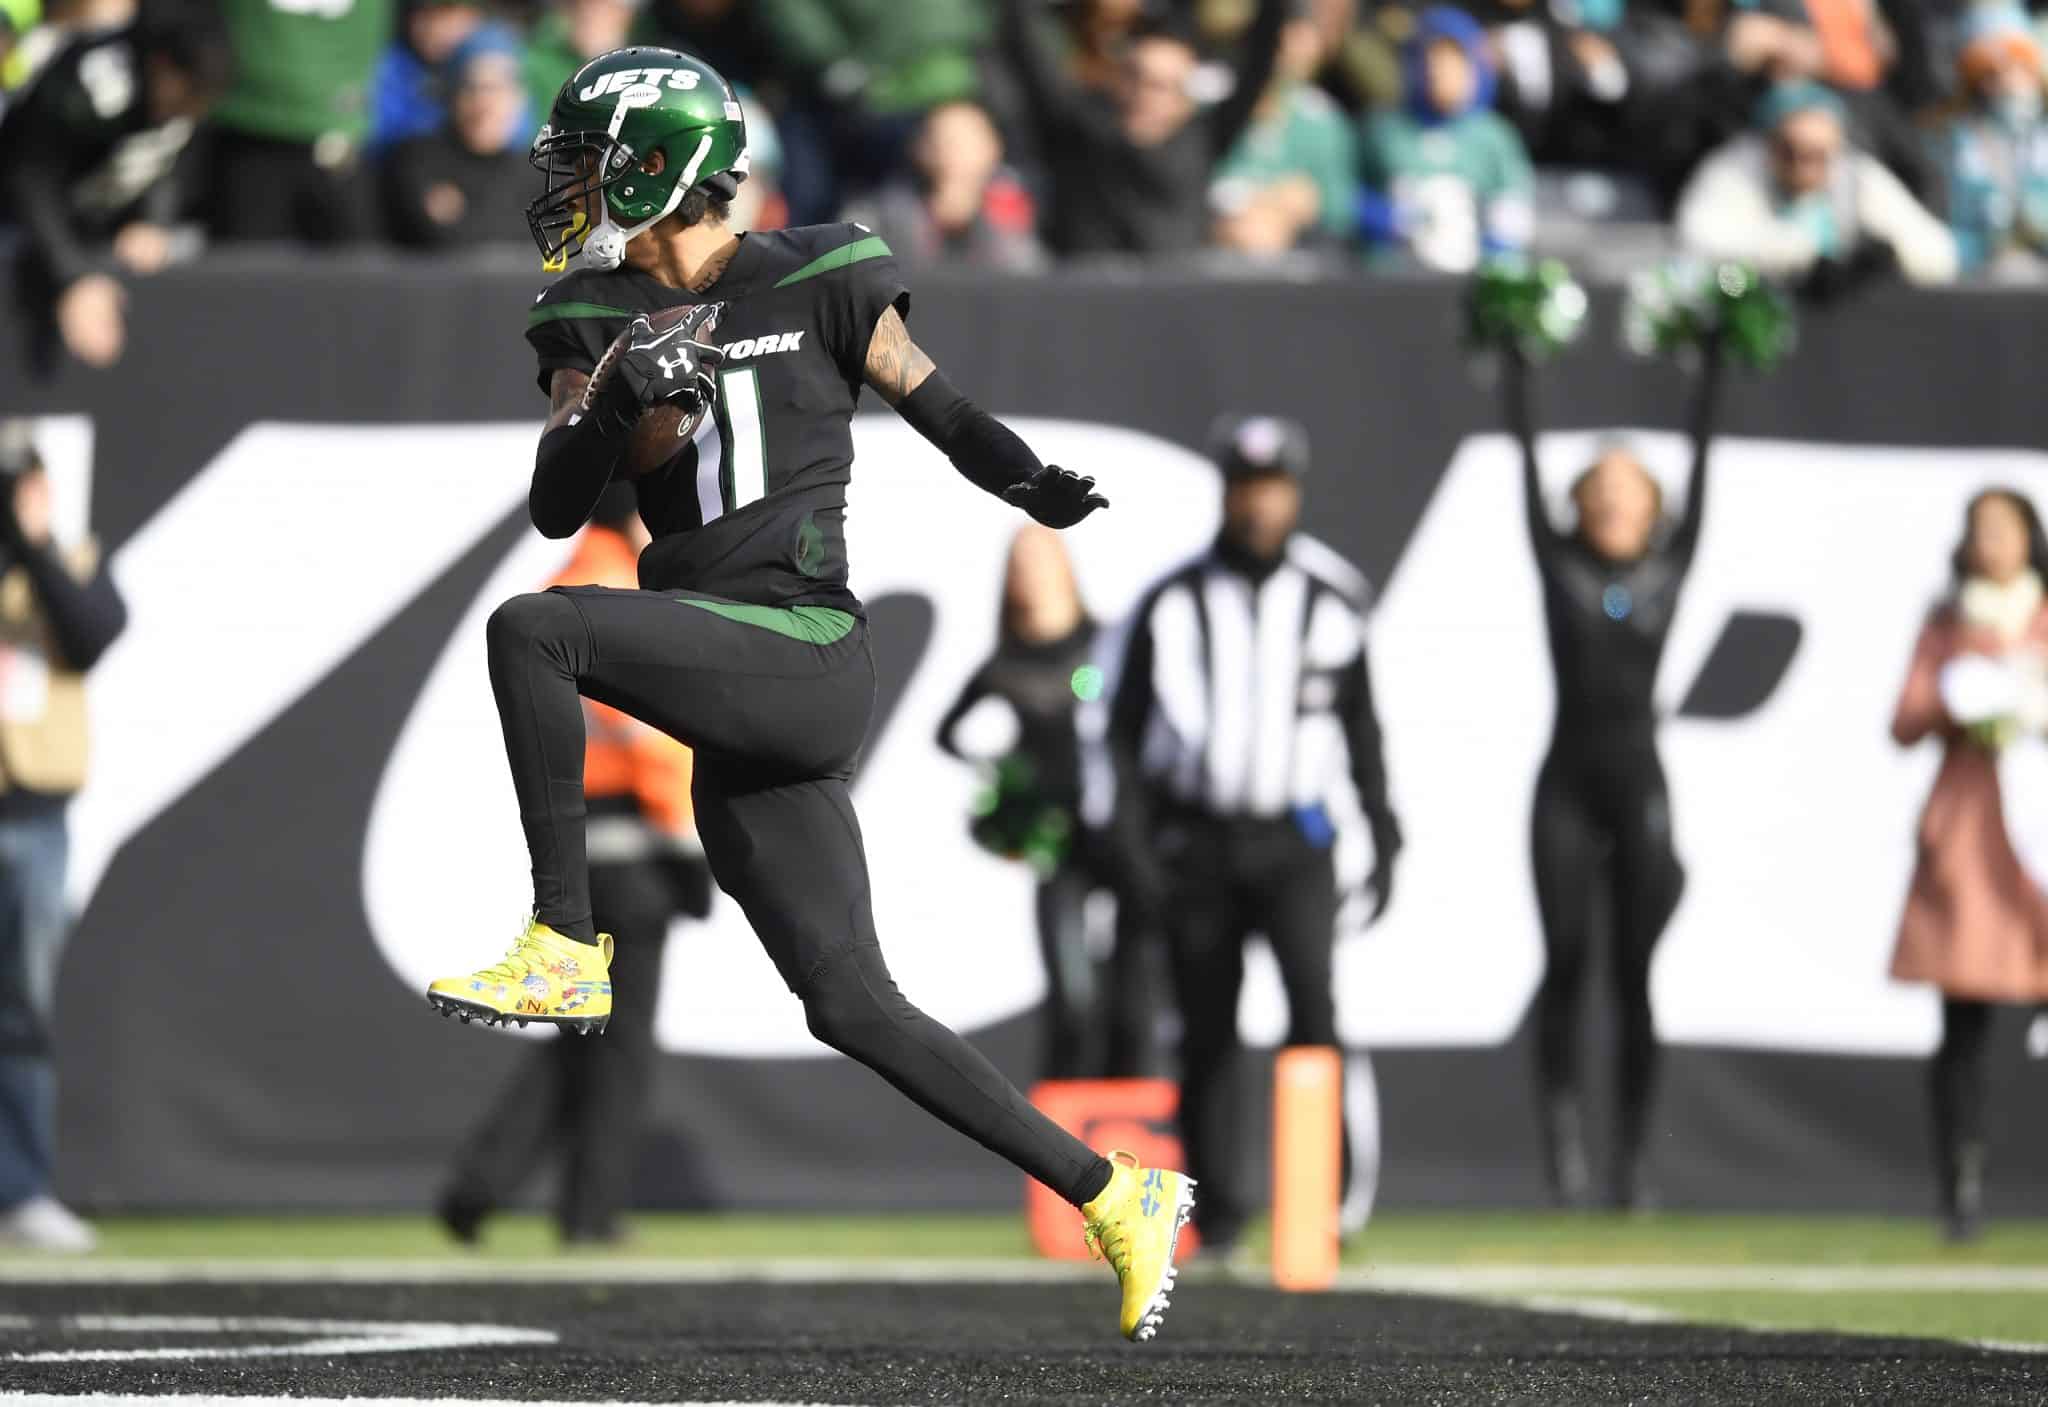 EAST RUTHERFORD, NEW JERSEY - DECEMBER 08: Robby Anderson #11 of the New York Jets runs the ball into the end zone for a touchdown during the first half of the game against the Miami Dolphins at MetLife Stadium on December 08, 2019 in East Rutherford, New Jersey.